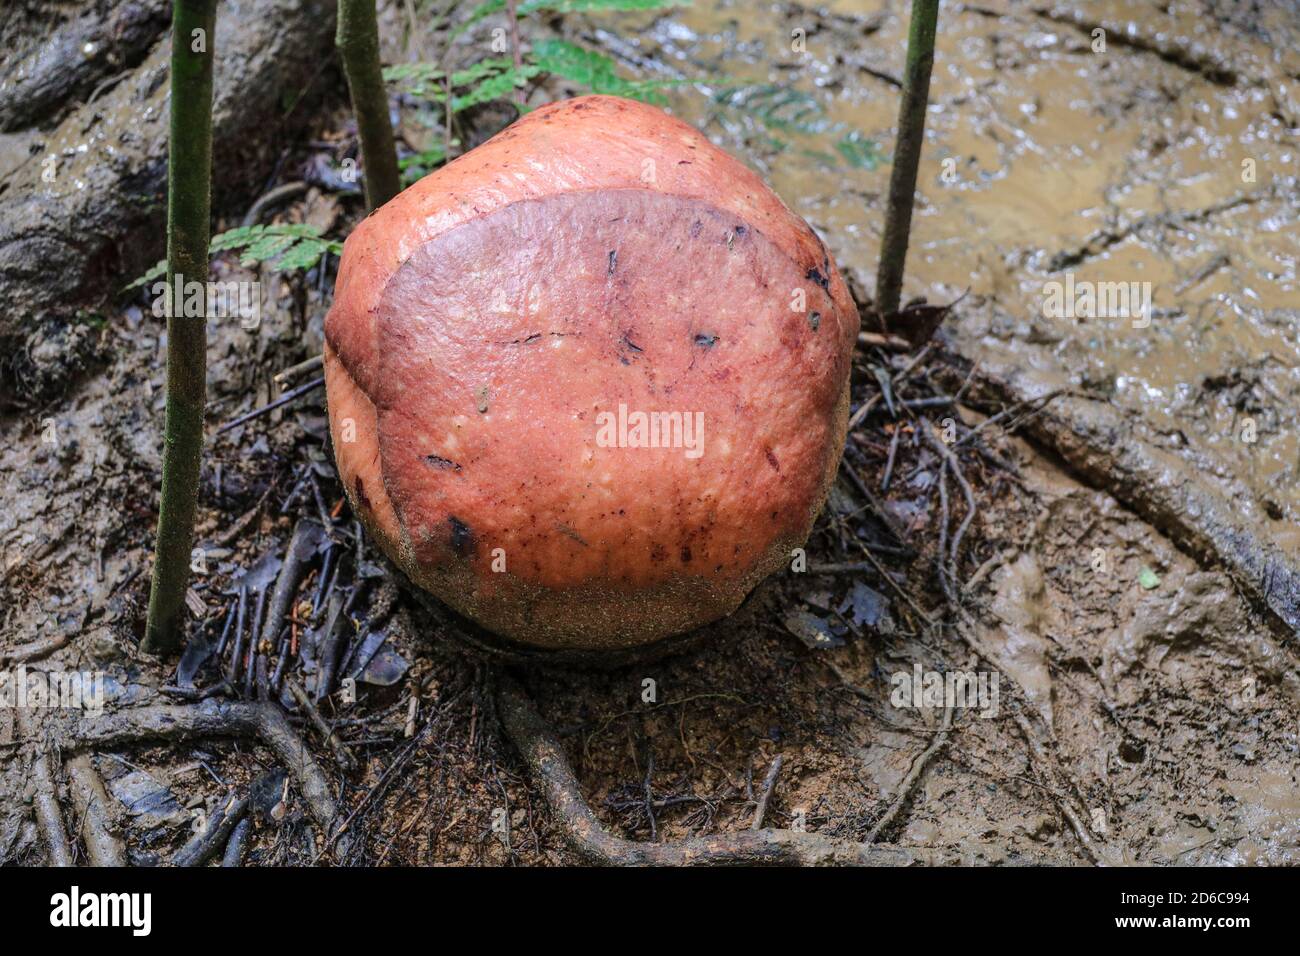 Bud of the Rafflesia kerrii from the rafflesia family, the largest flower in the world which is about to bloom. Stock Photo